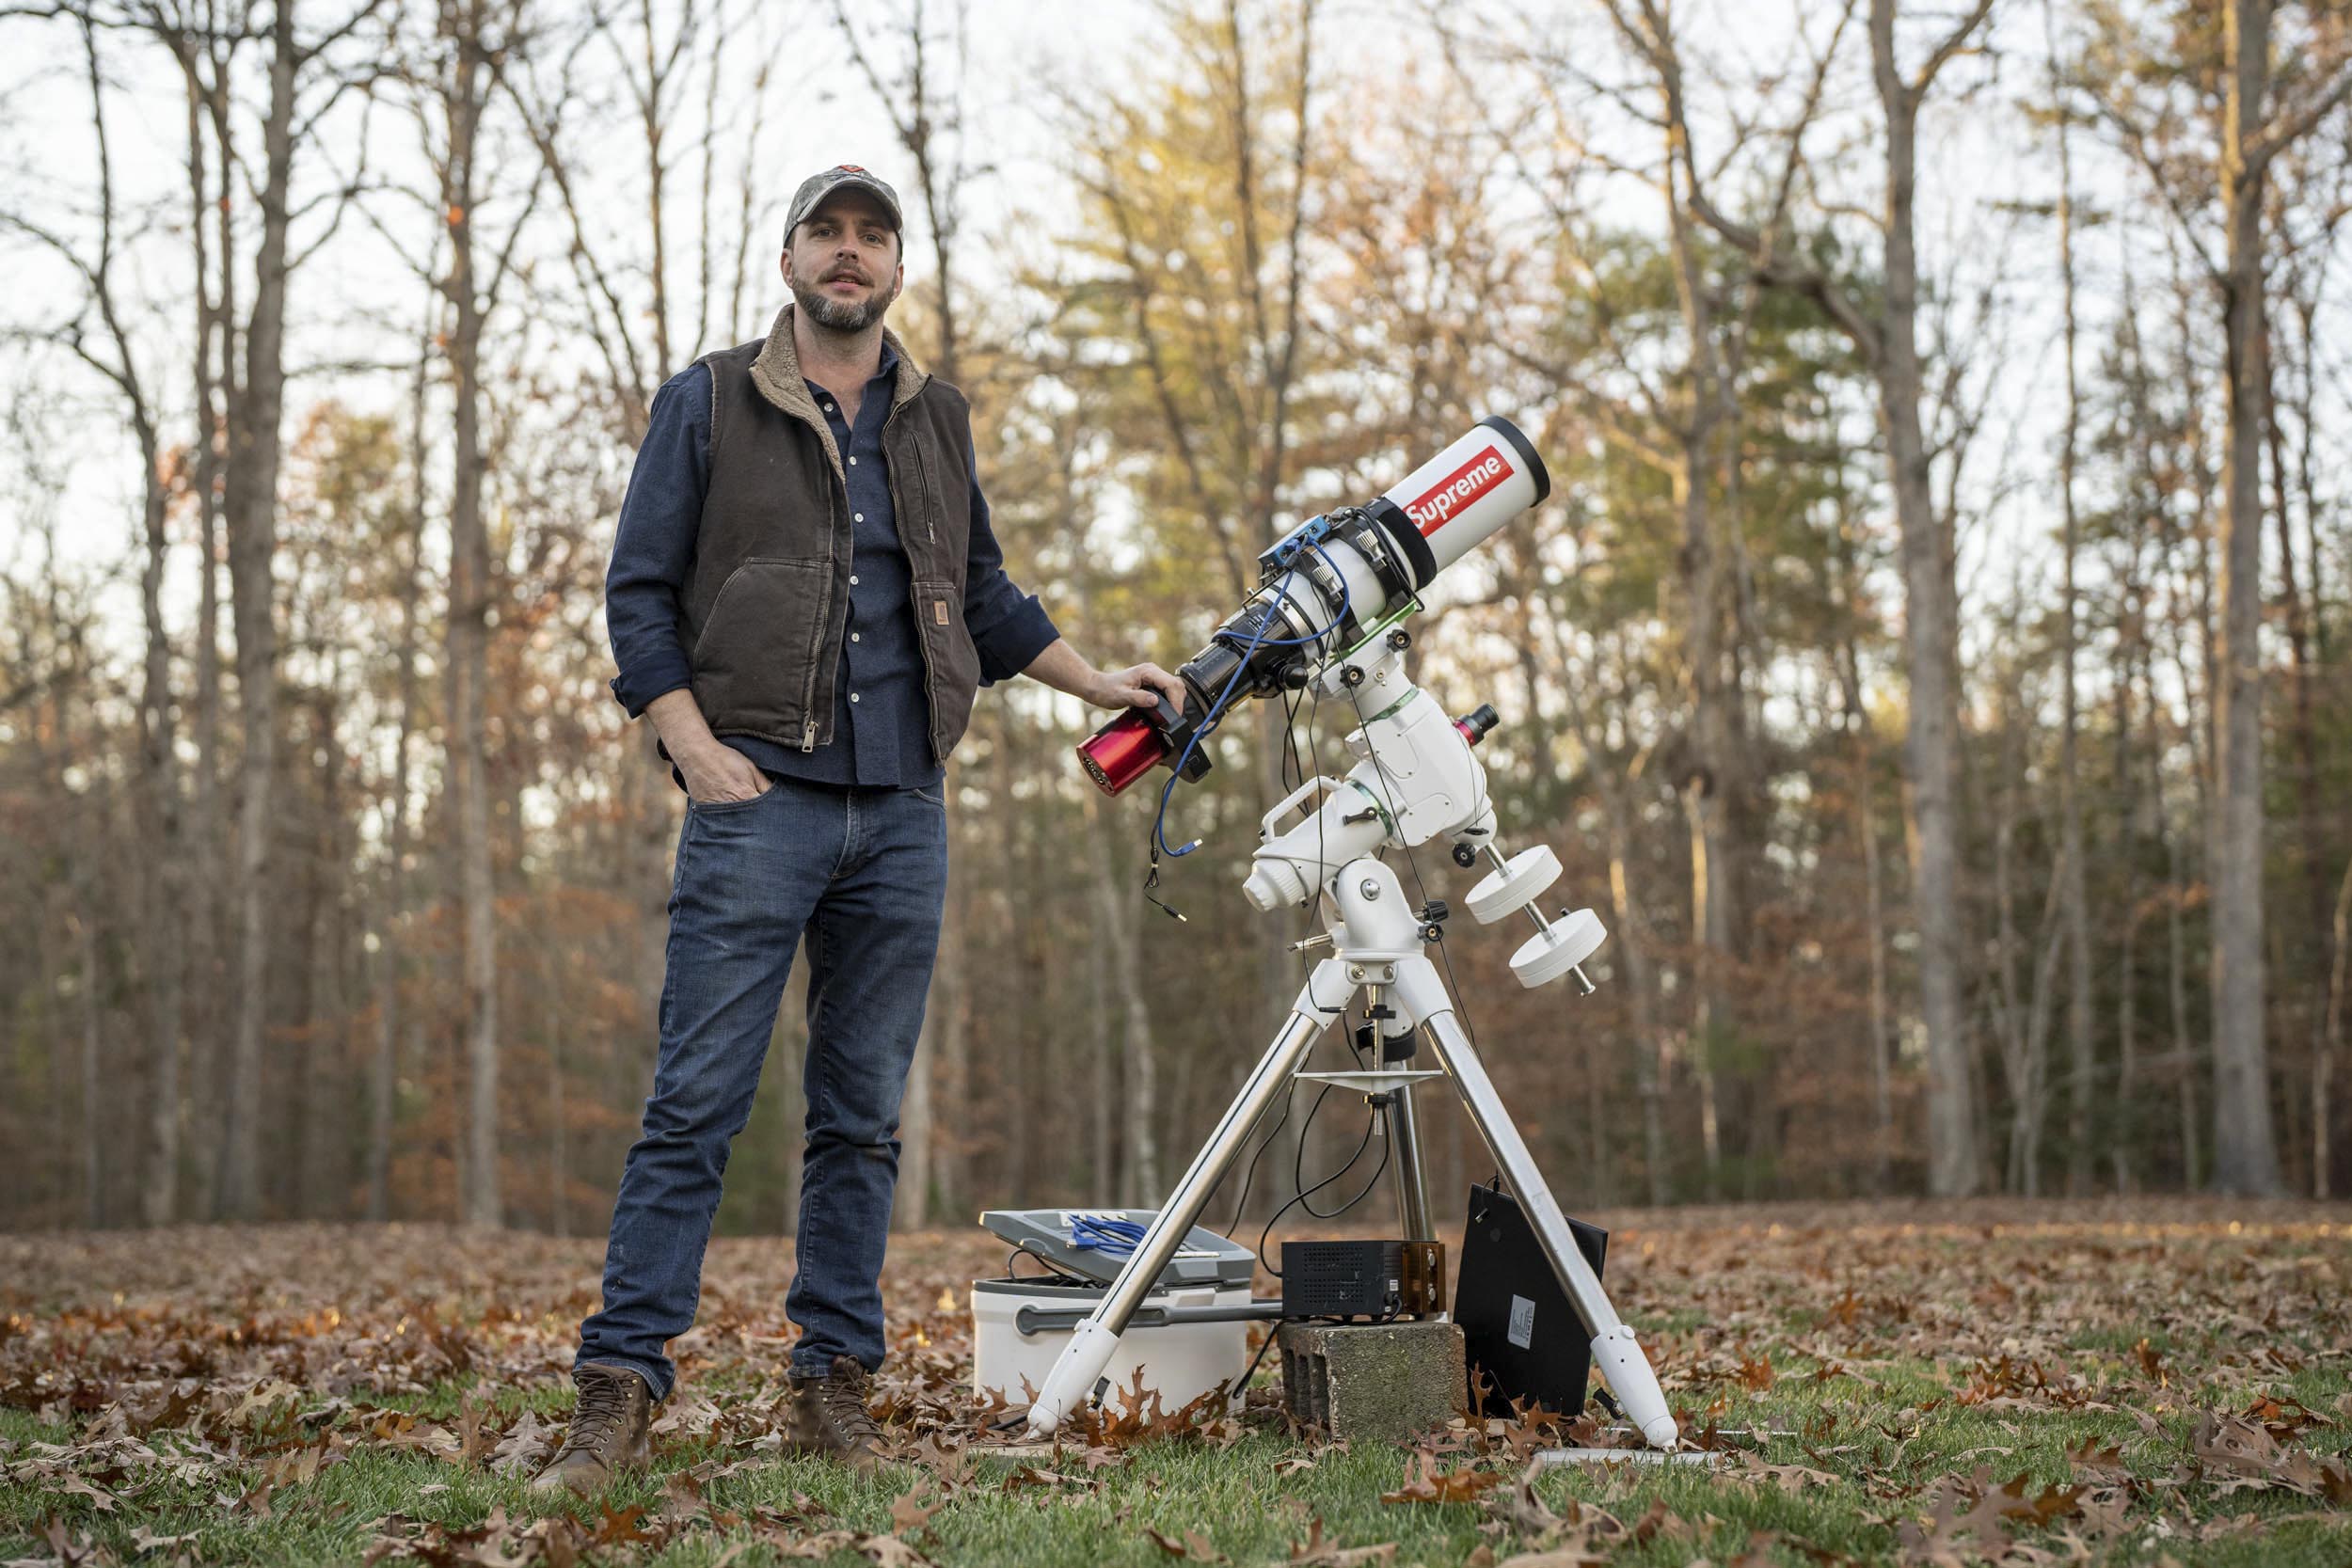 During the pandemic, Brennan Gilmore took up astrophotography, a field he had been interested in since taking astronomy as an undergrad. (Photo by Sanjay Suchak, University Communications)